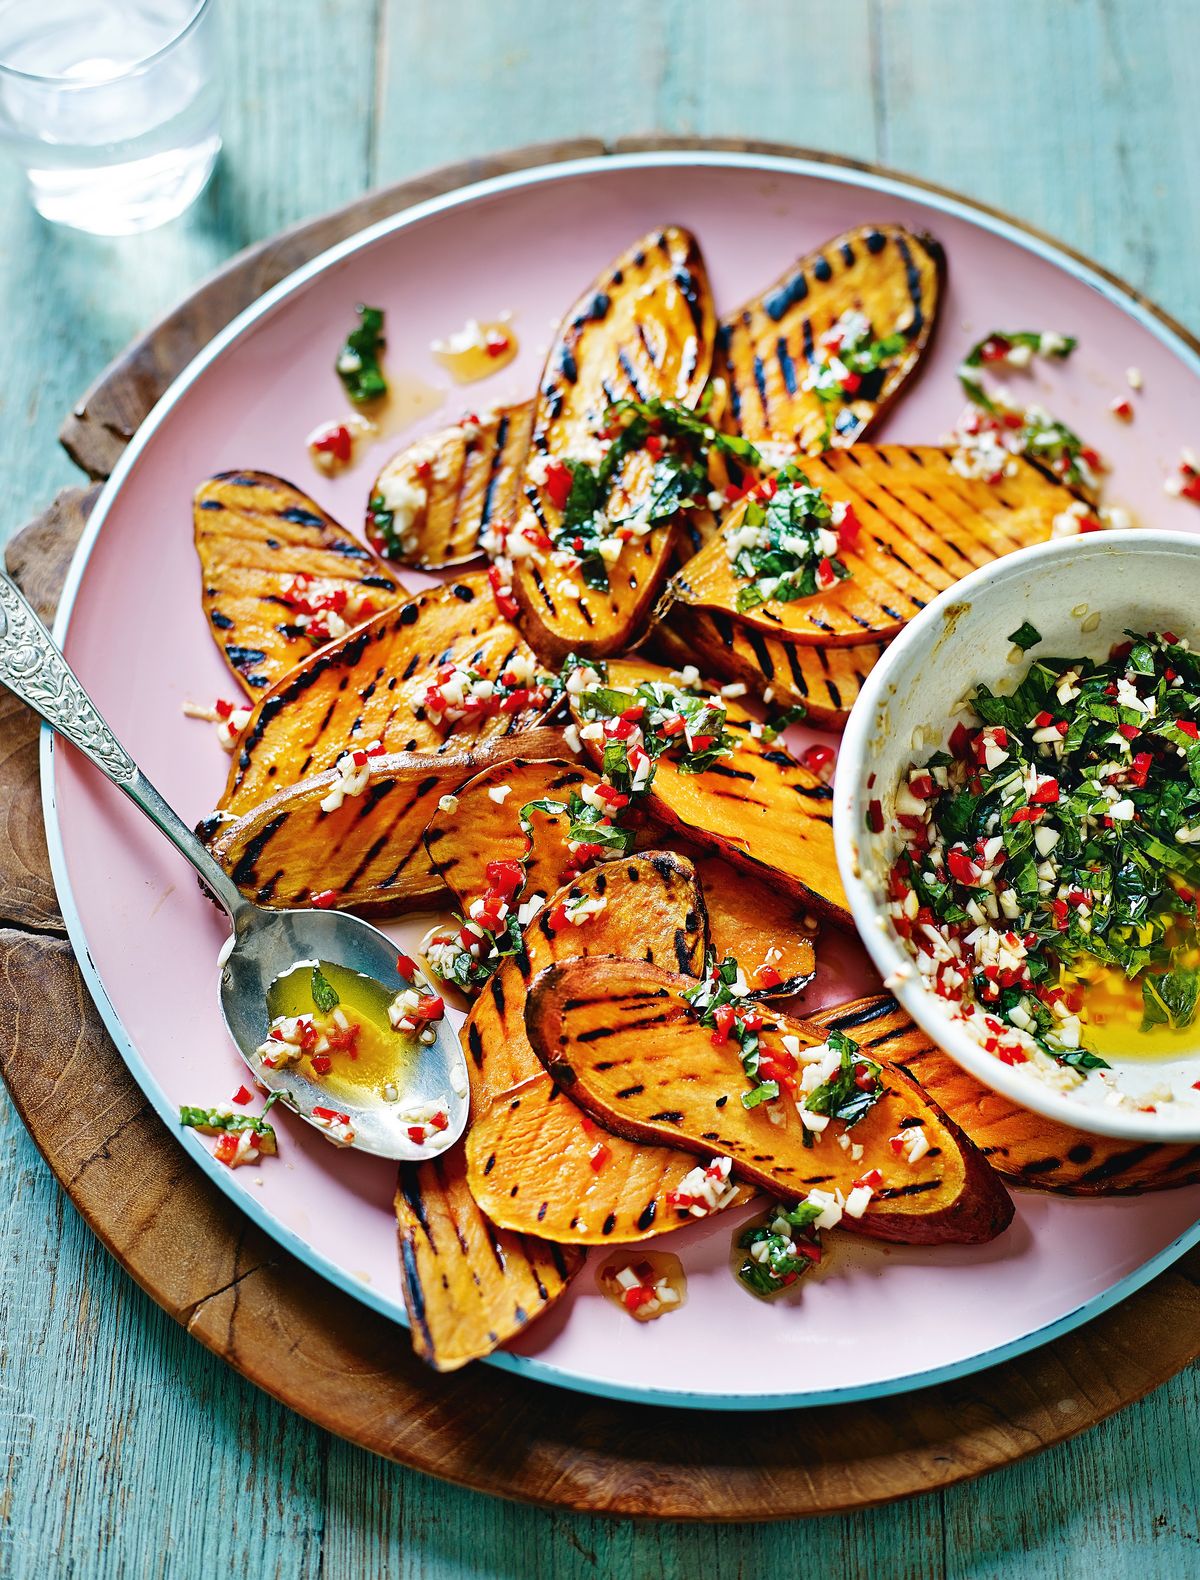 Griddled Sweet Potatoes with Mint, Chilli and Smoked Garlic